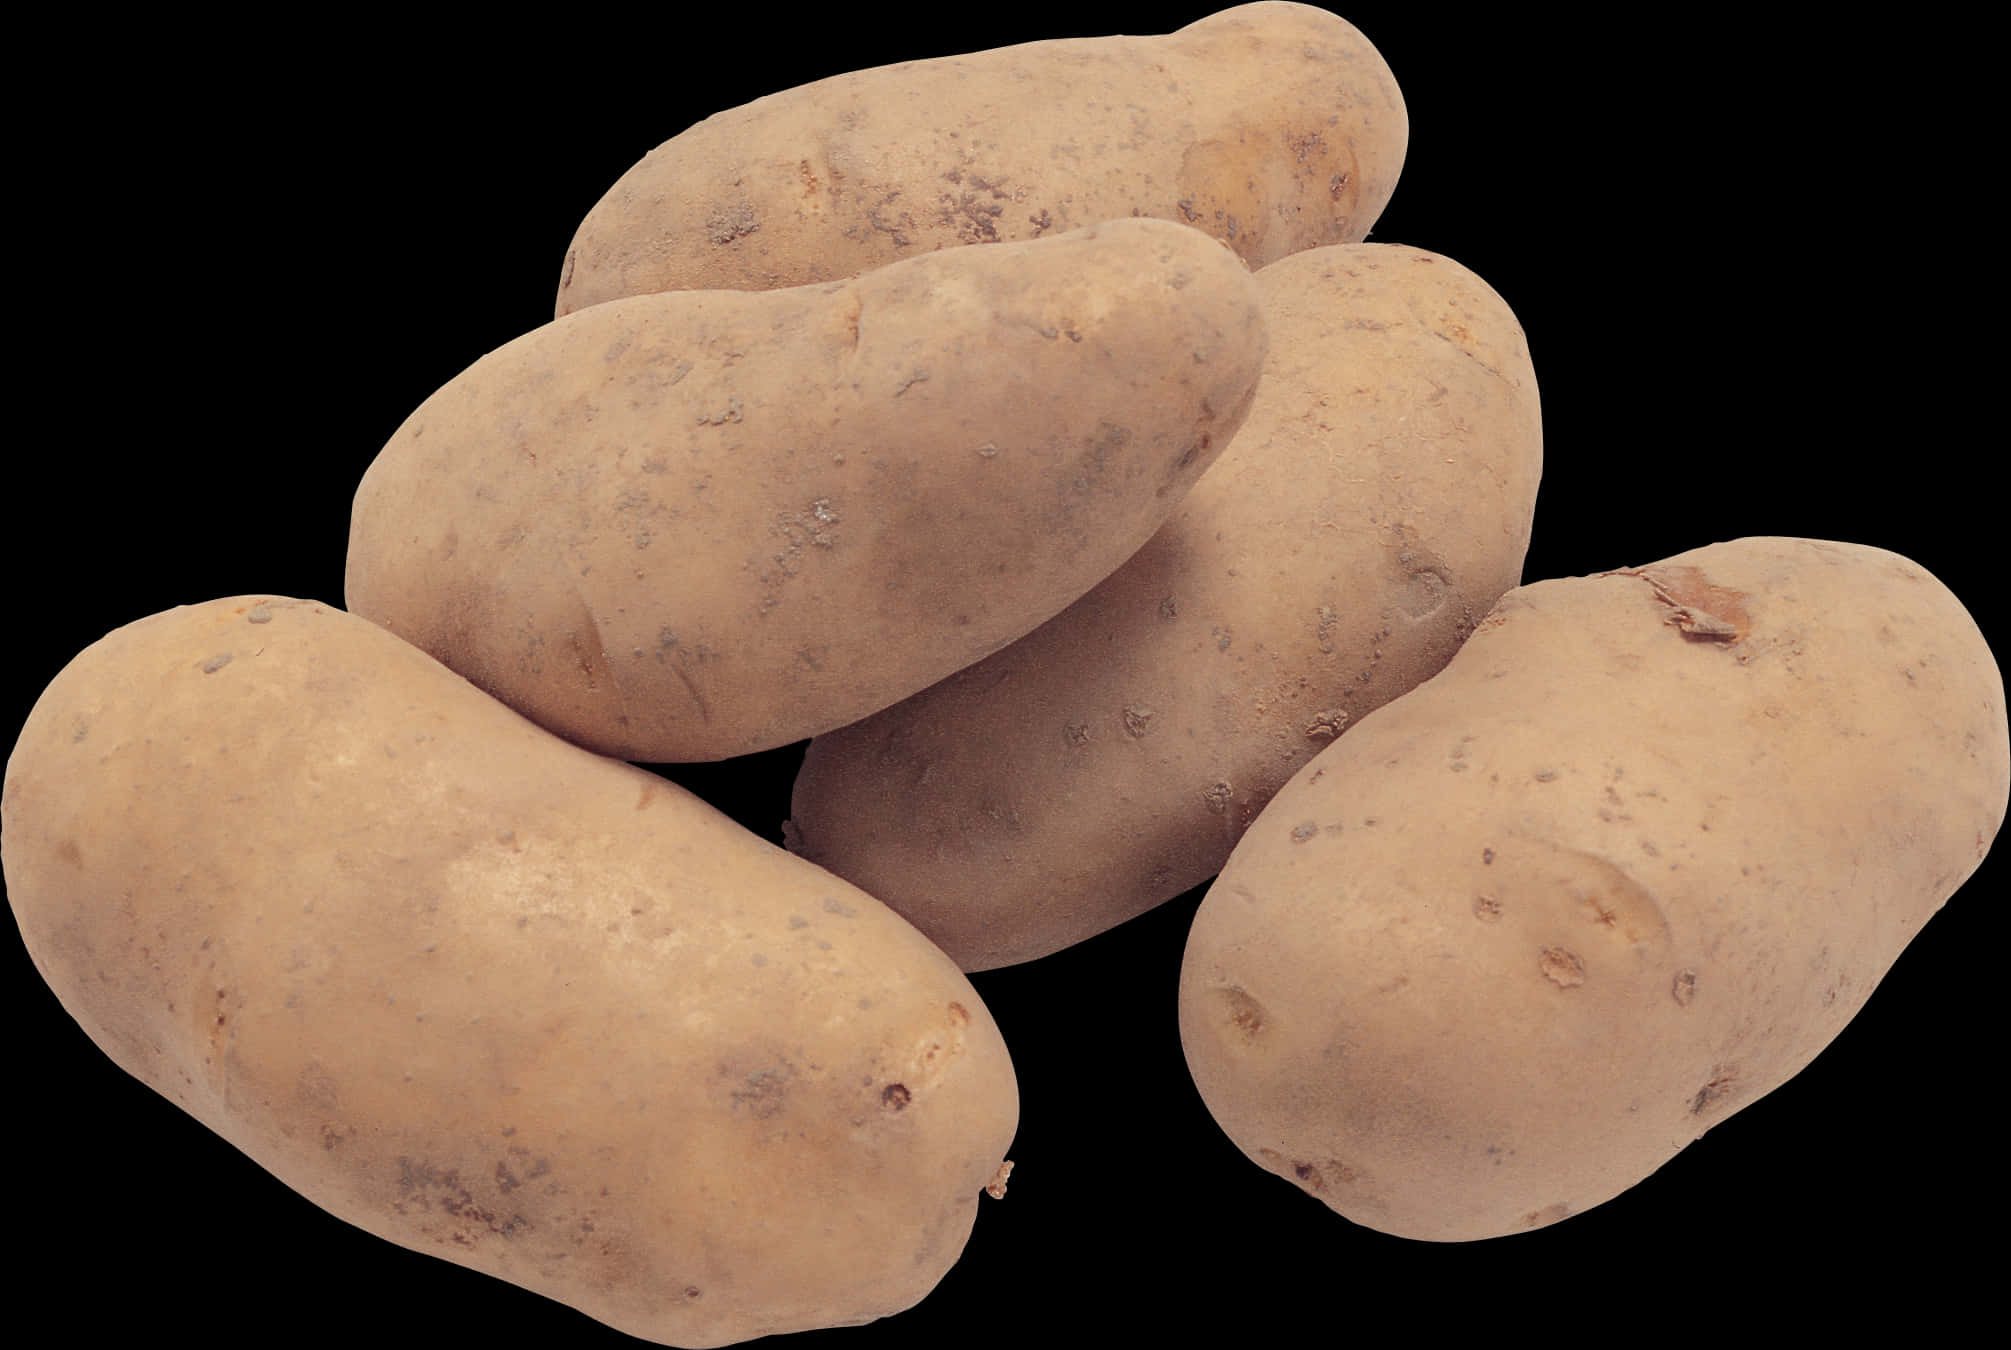 A Group Of Potatoes On A Black Background